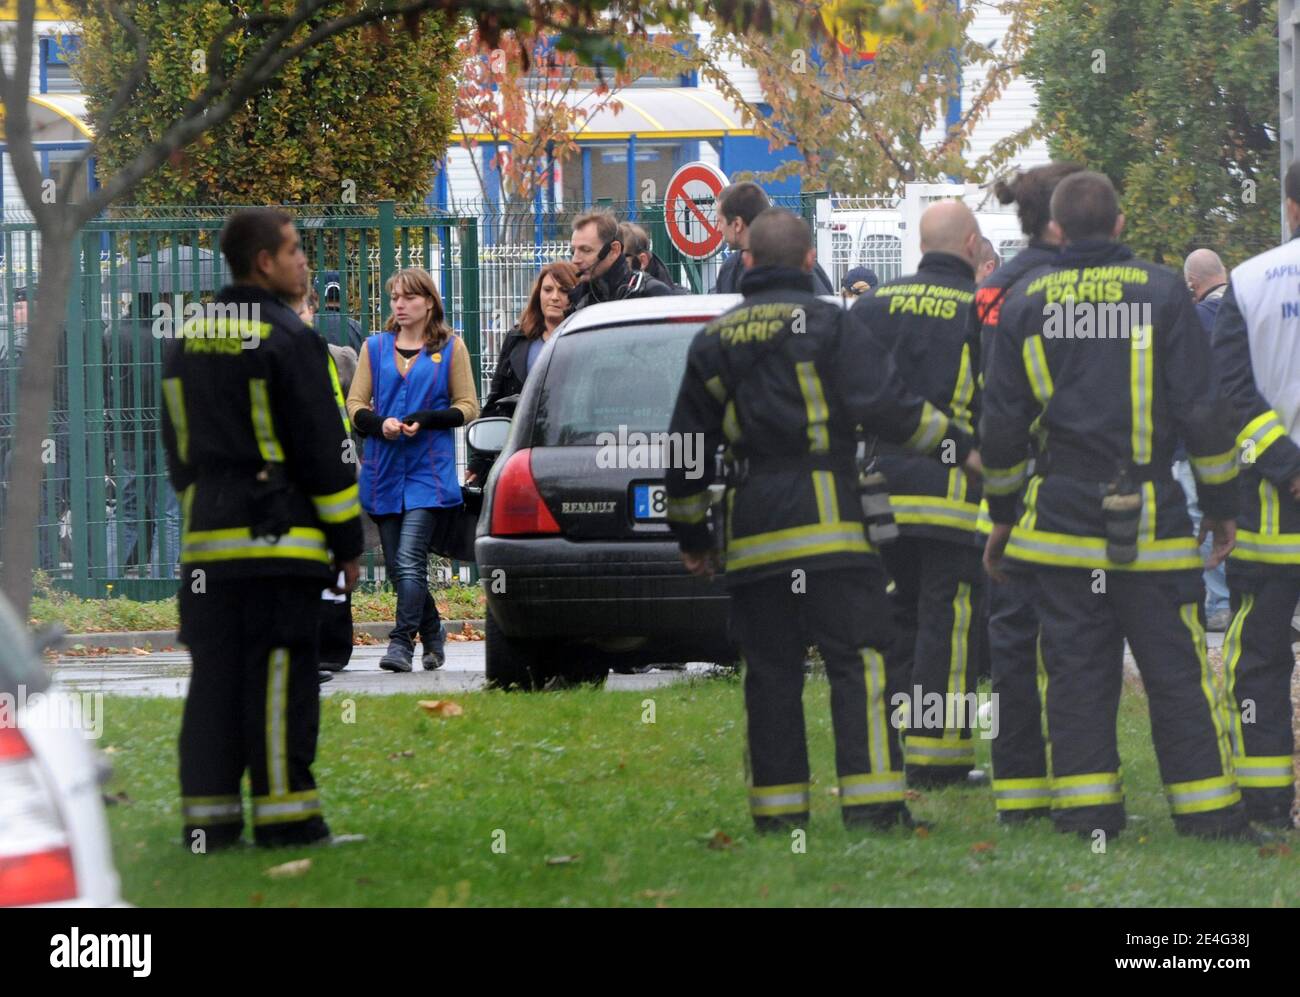 A hostage leaves the LIDL supermarket in an industrial zone in Sevran, north of Paris, October 21, 2009 after three men held people hostages were released, French police